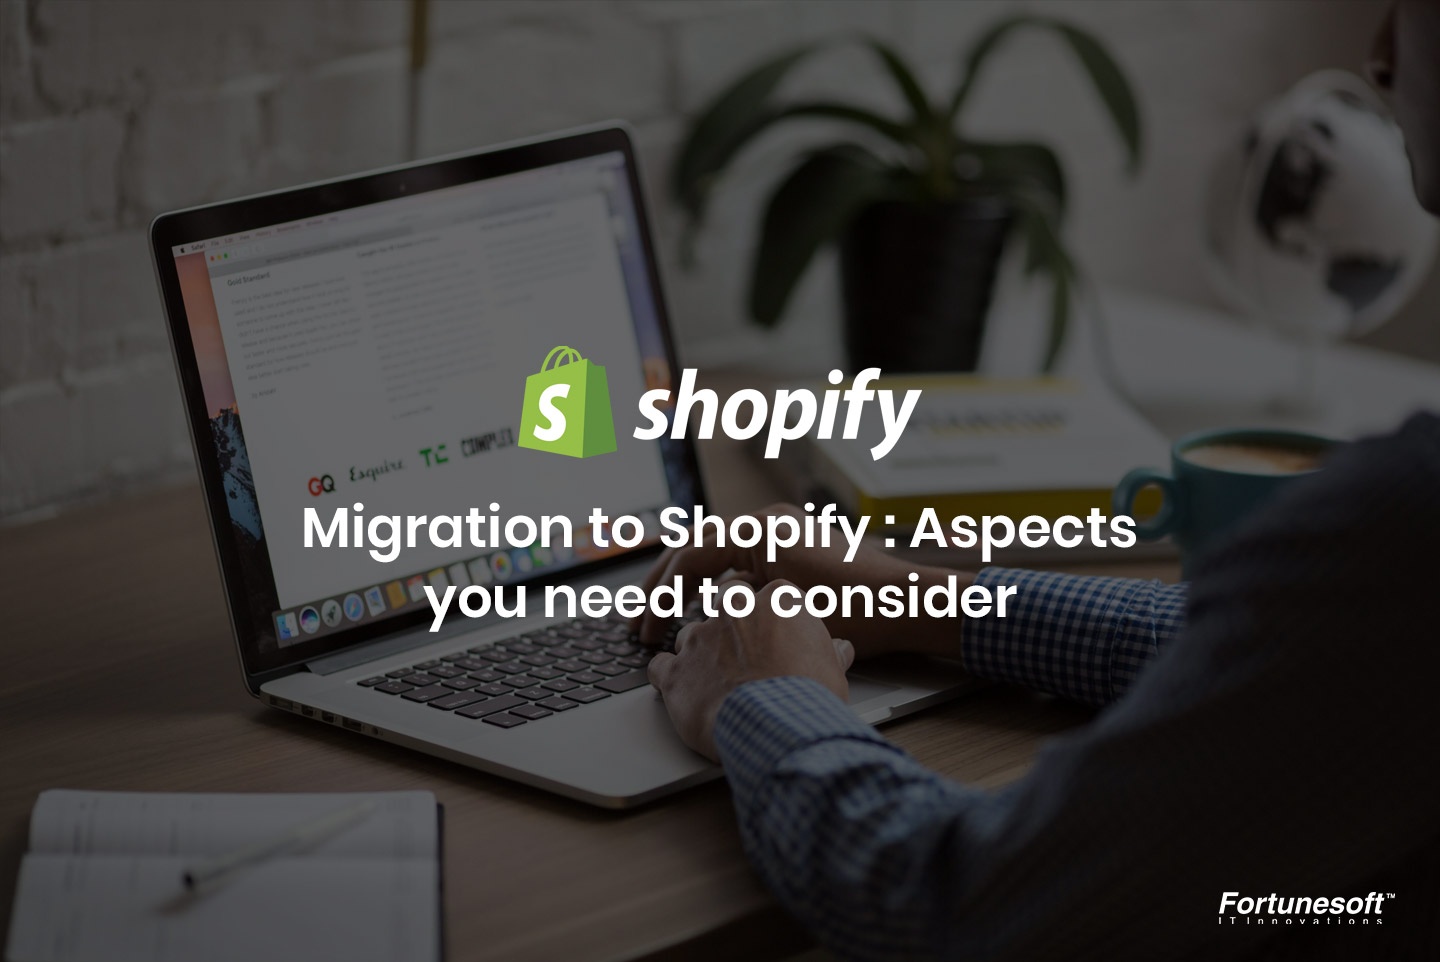 Fortunesoft IT Innovations, Inc. Opencart News: Migration to Shopify : Aspects you need to consider